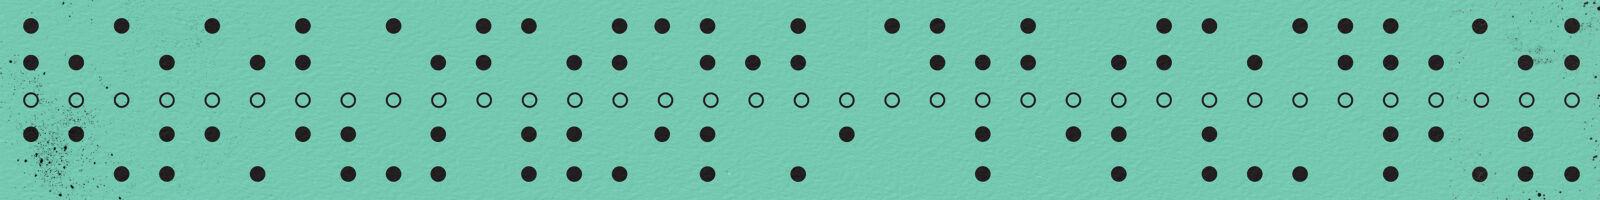 An artistic depiction of the five-bit Boadot computer paper tape across a mint green paper background. The dots are scattered as though at random across the long vertical image.